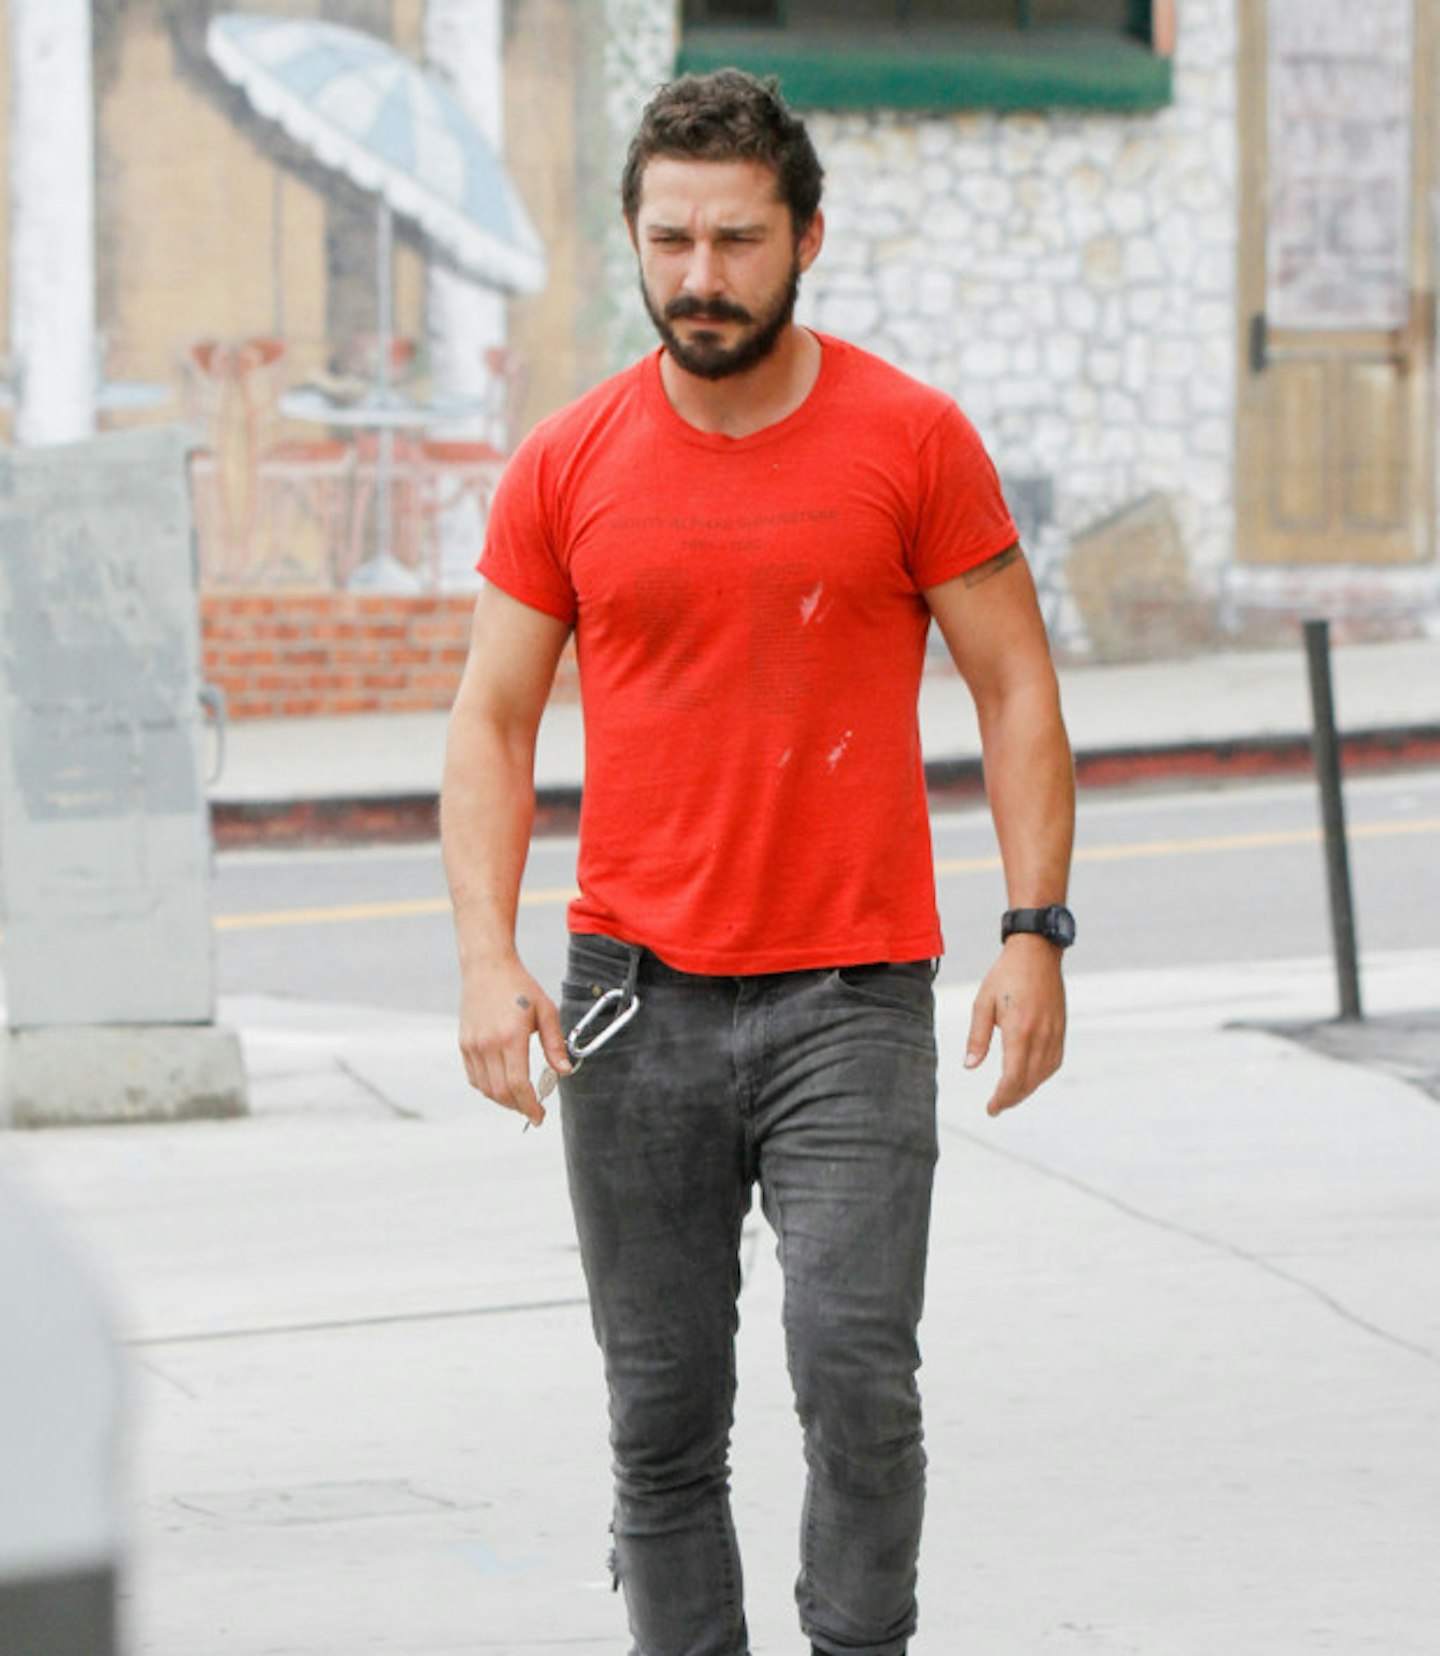 'Alright, mate? I'm Shia LaBeouf. Yeah can I kip in your shed?'